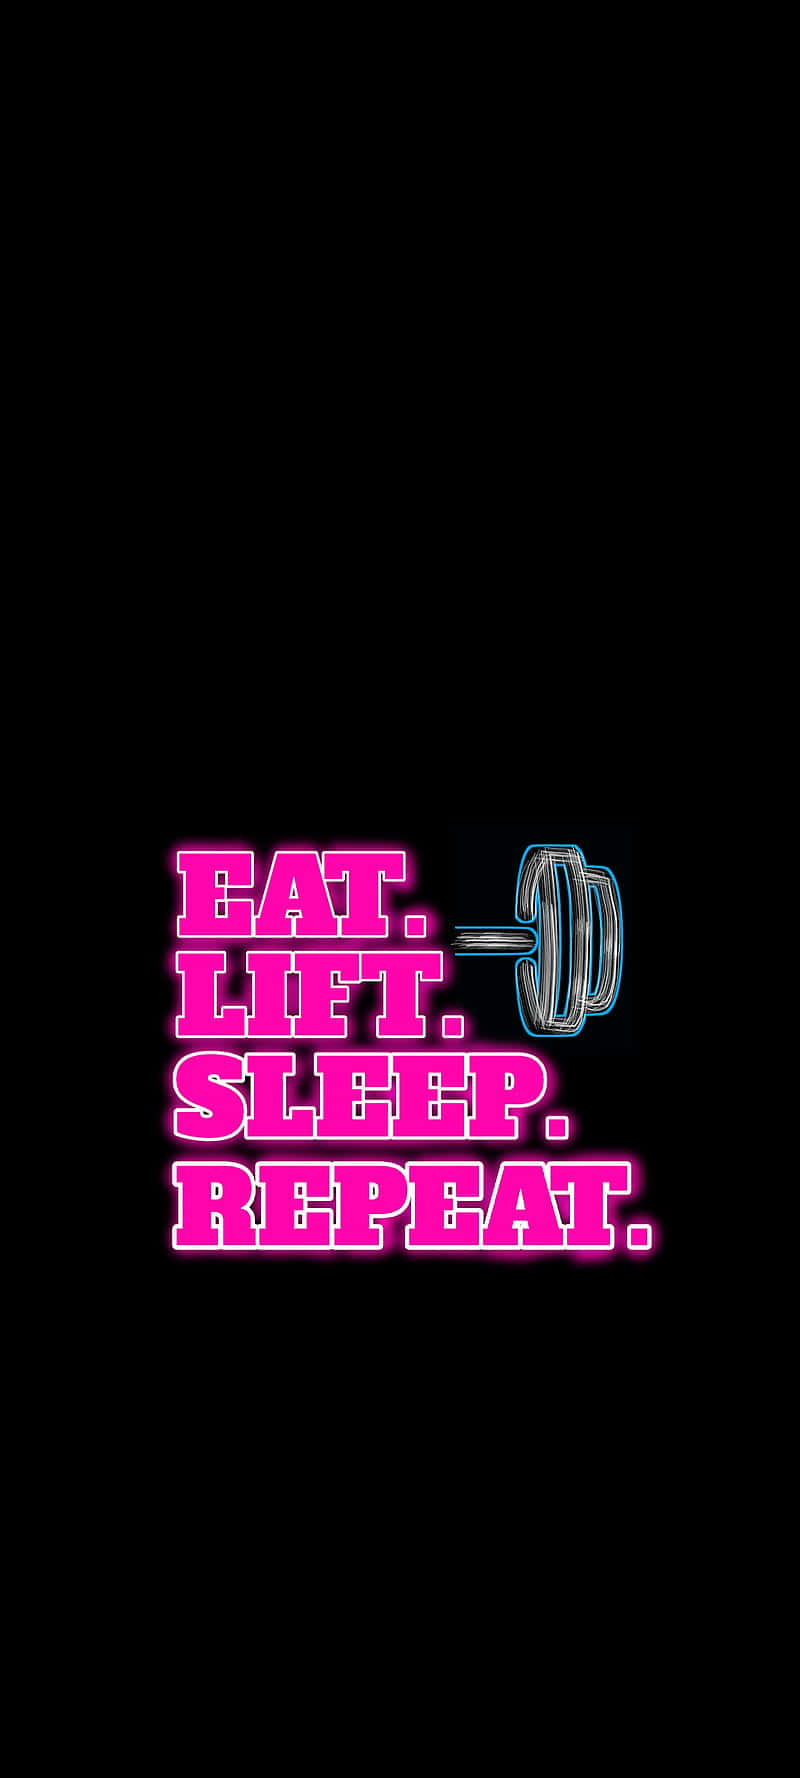 Fitness Mantra Neon Sign Wallpaper